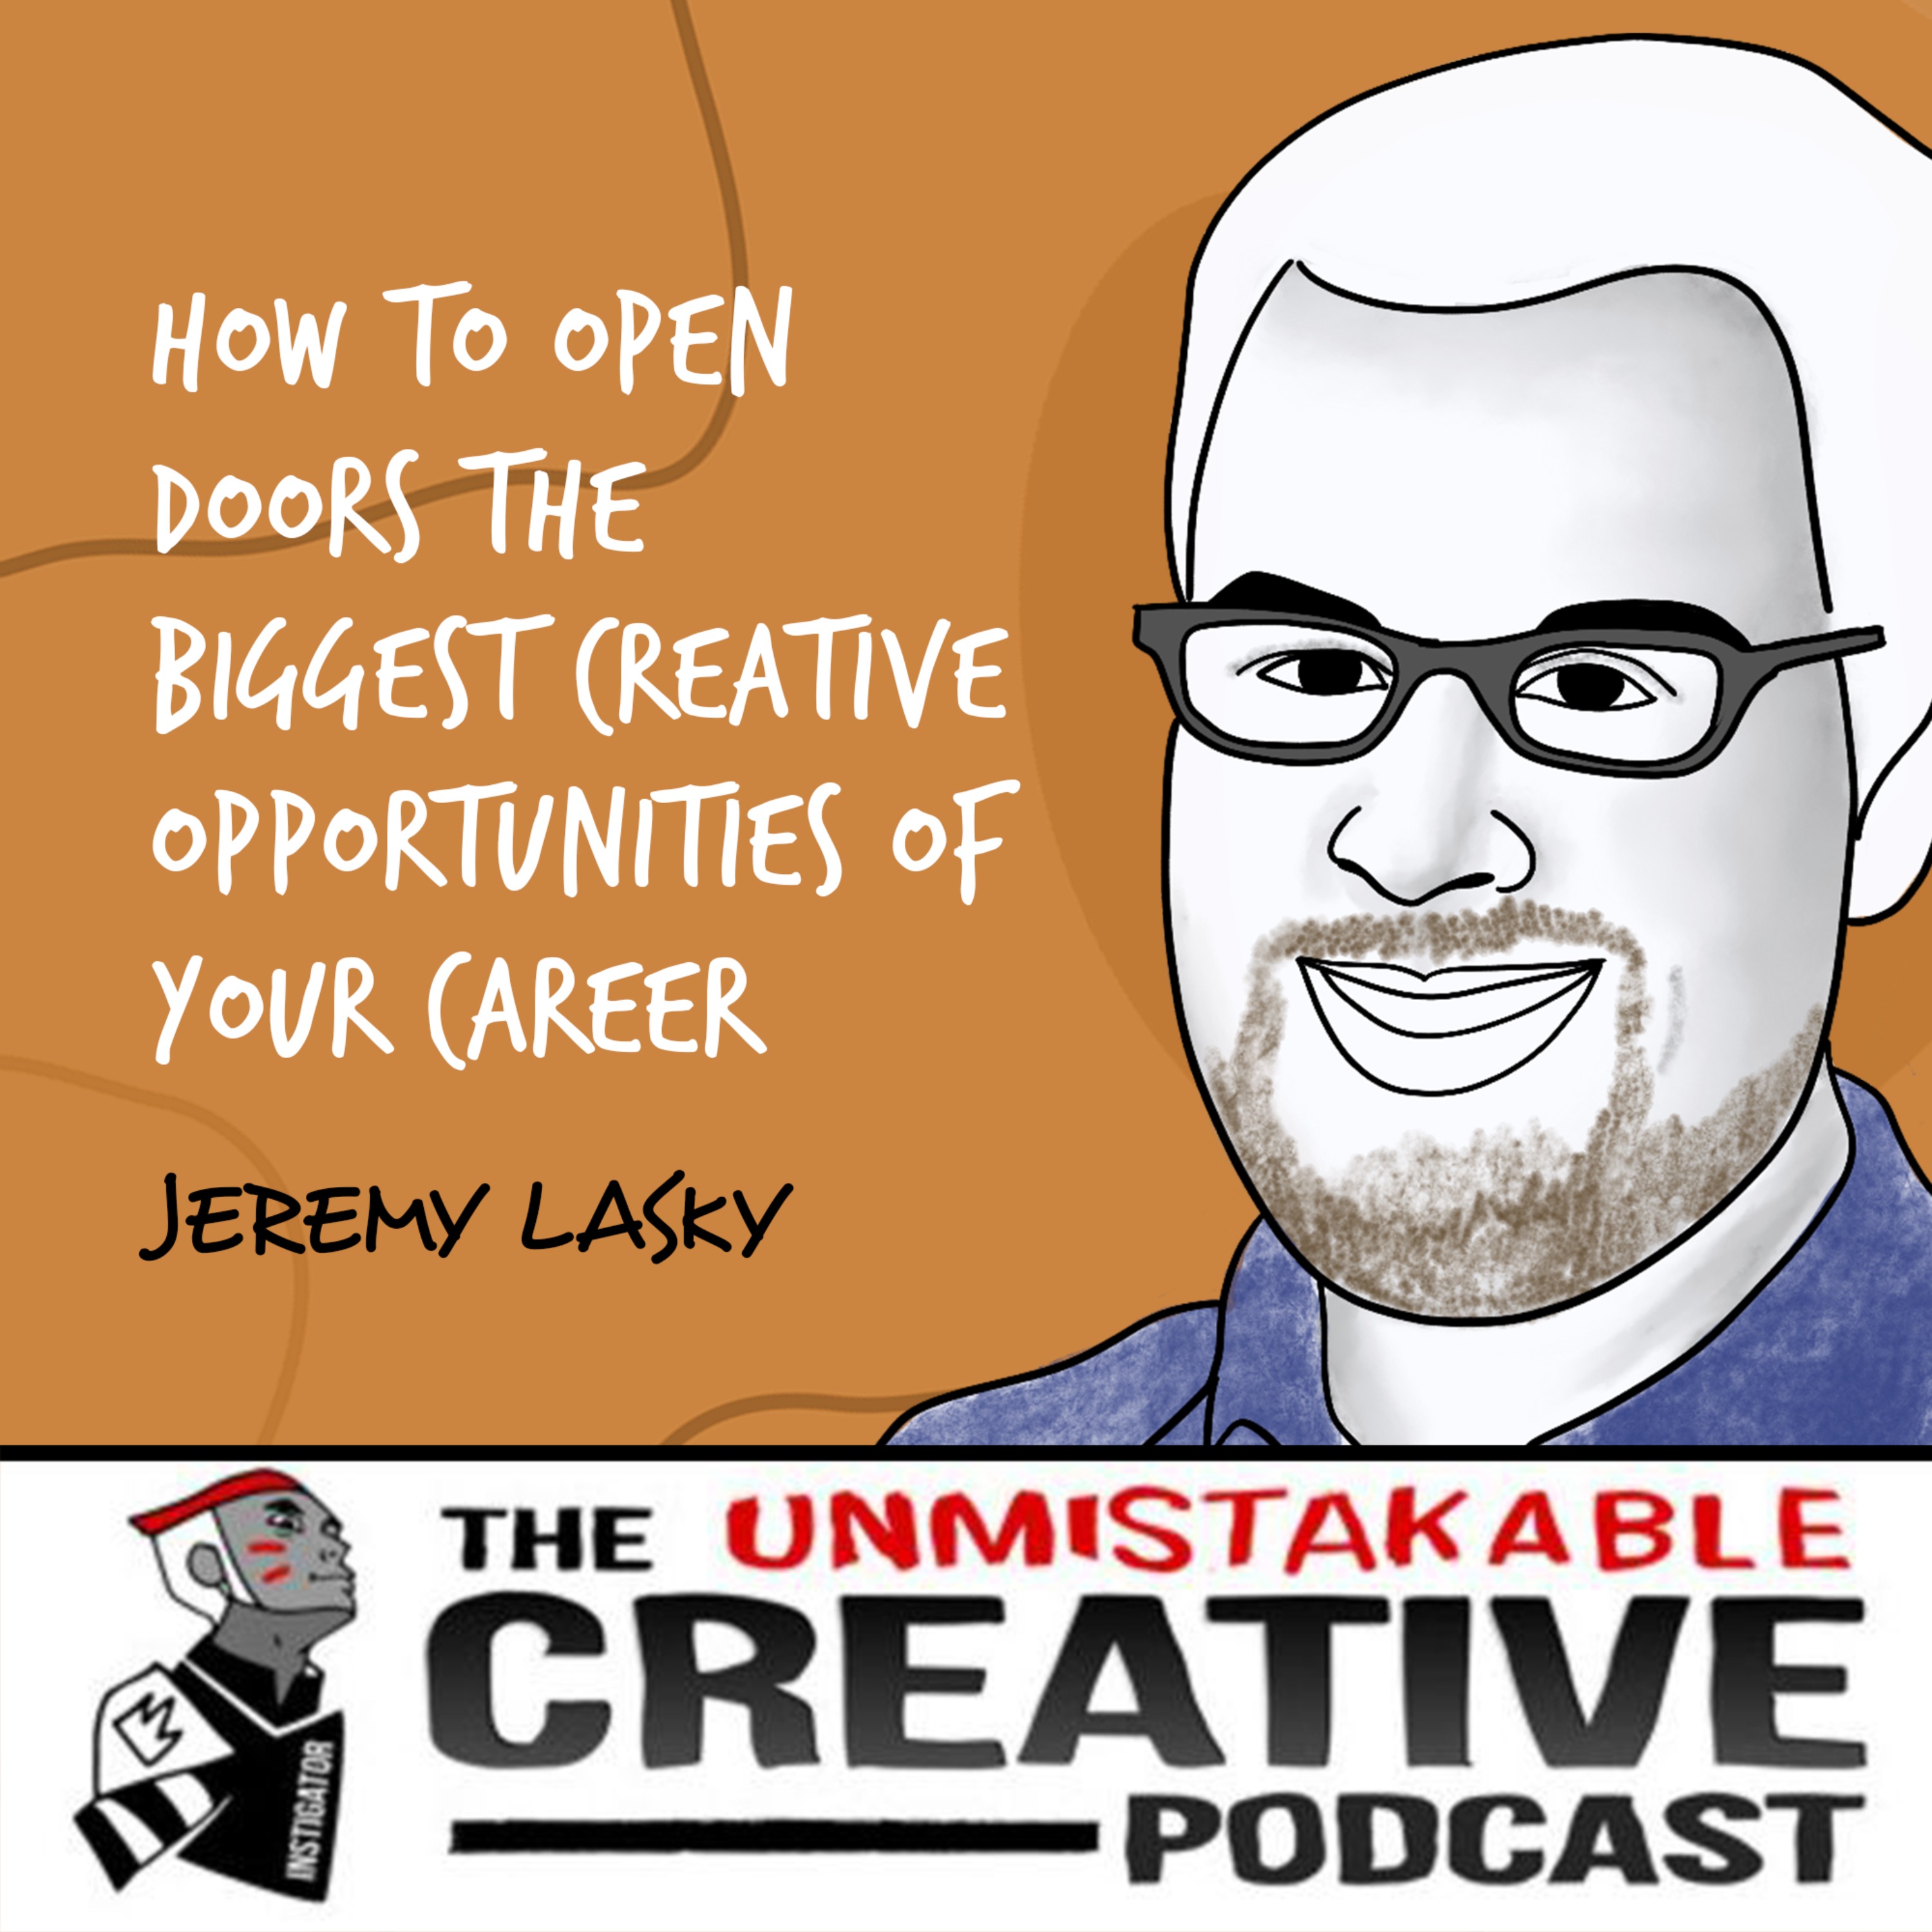 Jeremy Lasky | How to Open Doors to The Biggest Creative Opportunities of Your Career Image